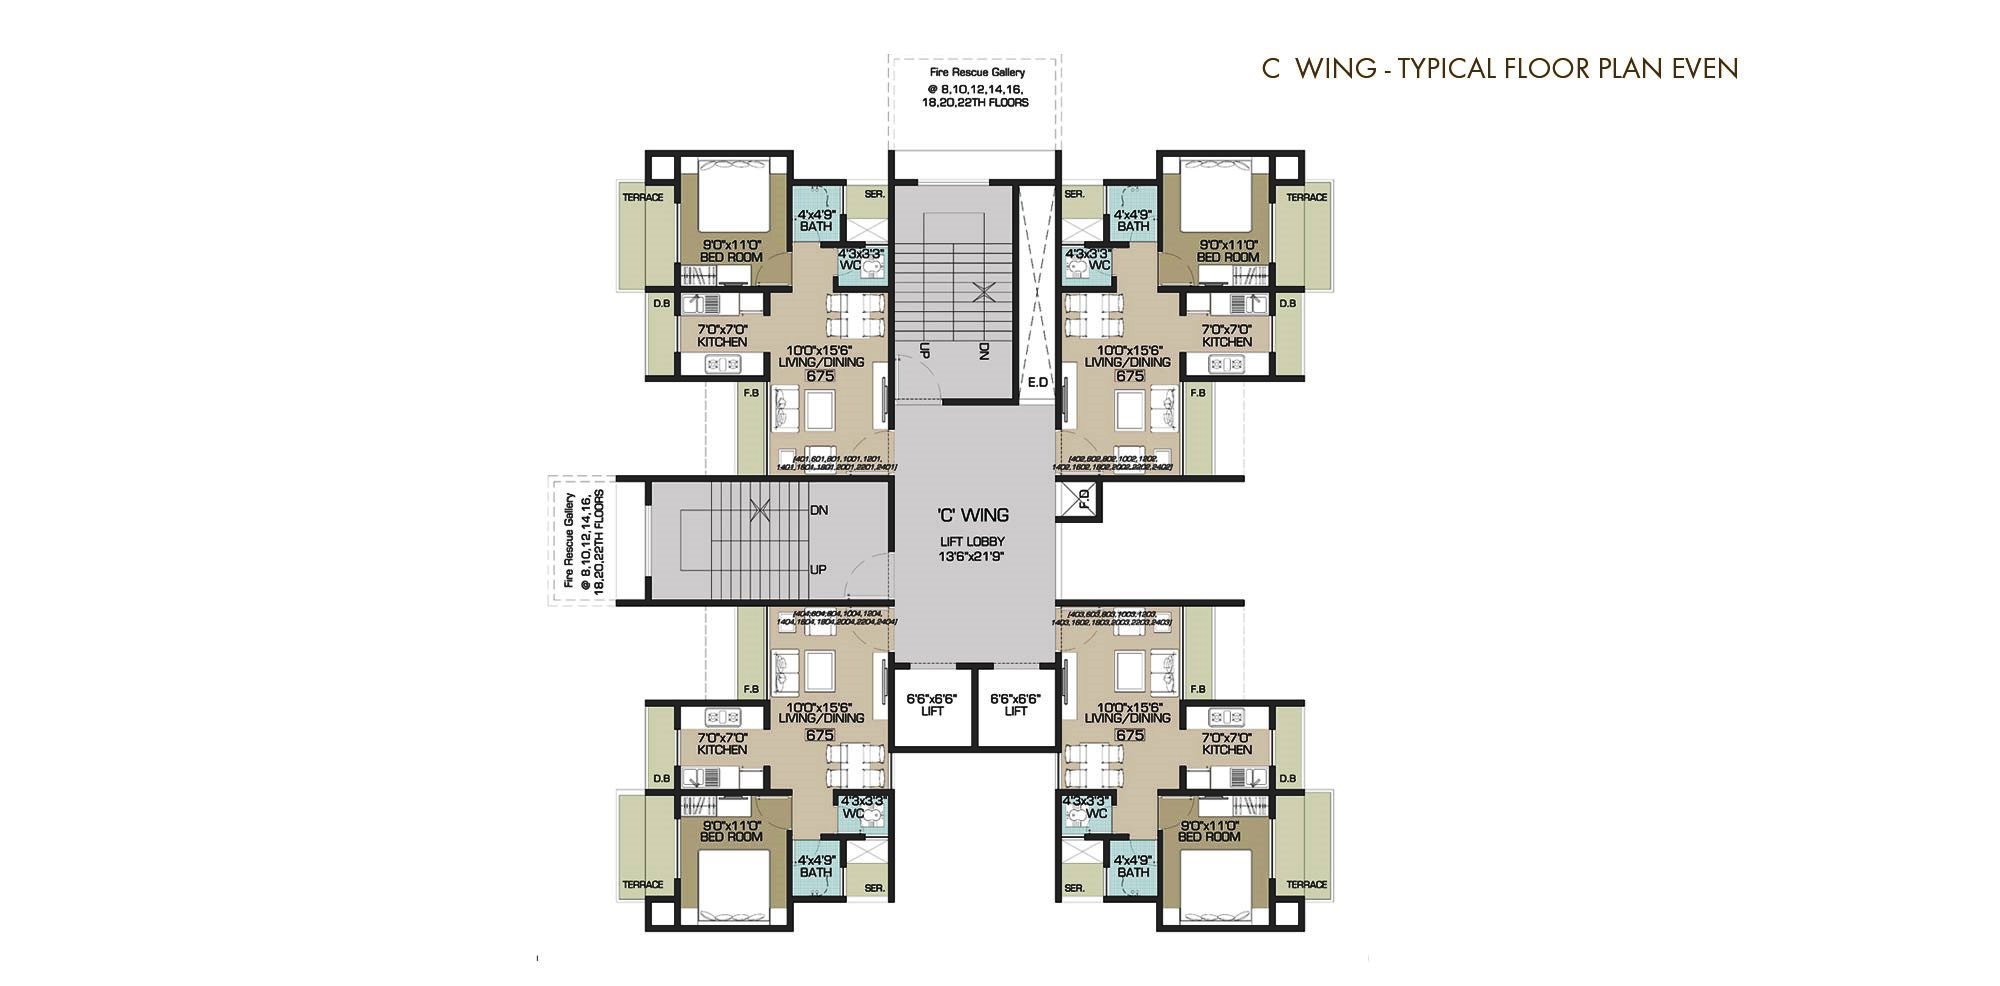 Residential Multistorey Apartment for Sale in Sector-35 F , Kharghar-West, Mumbai